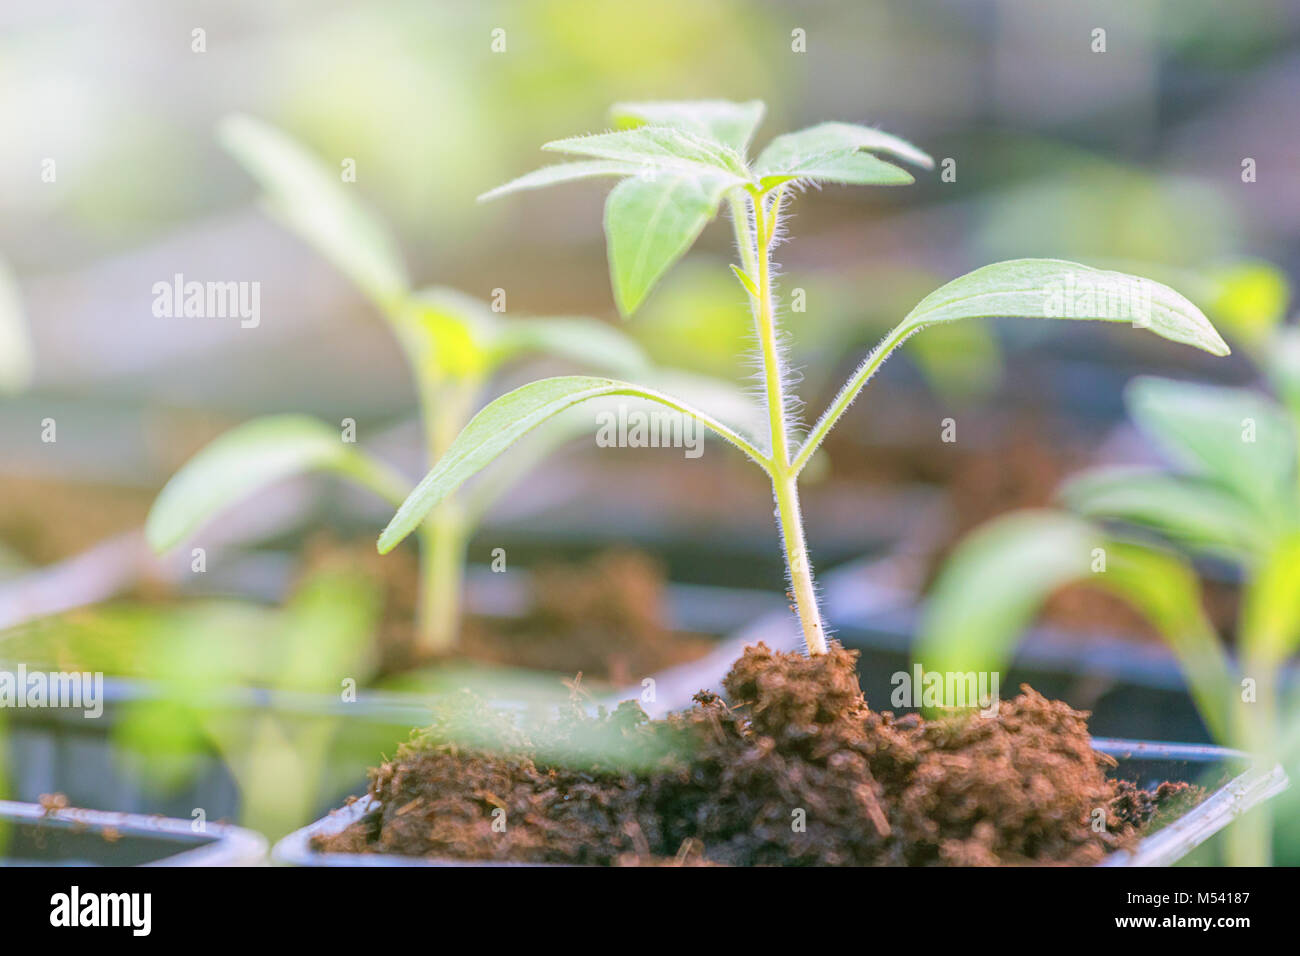 Tomato seedlings in a greenhouse. Stock Photo